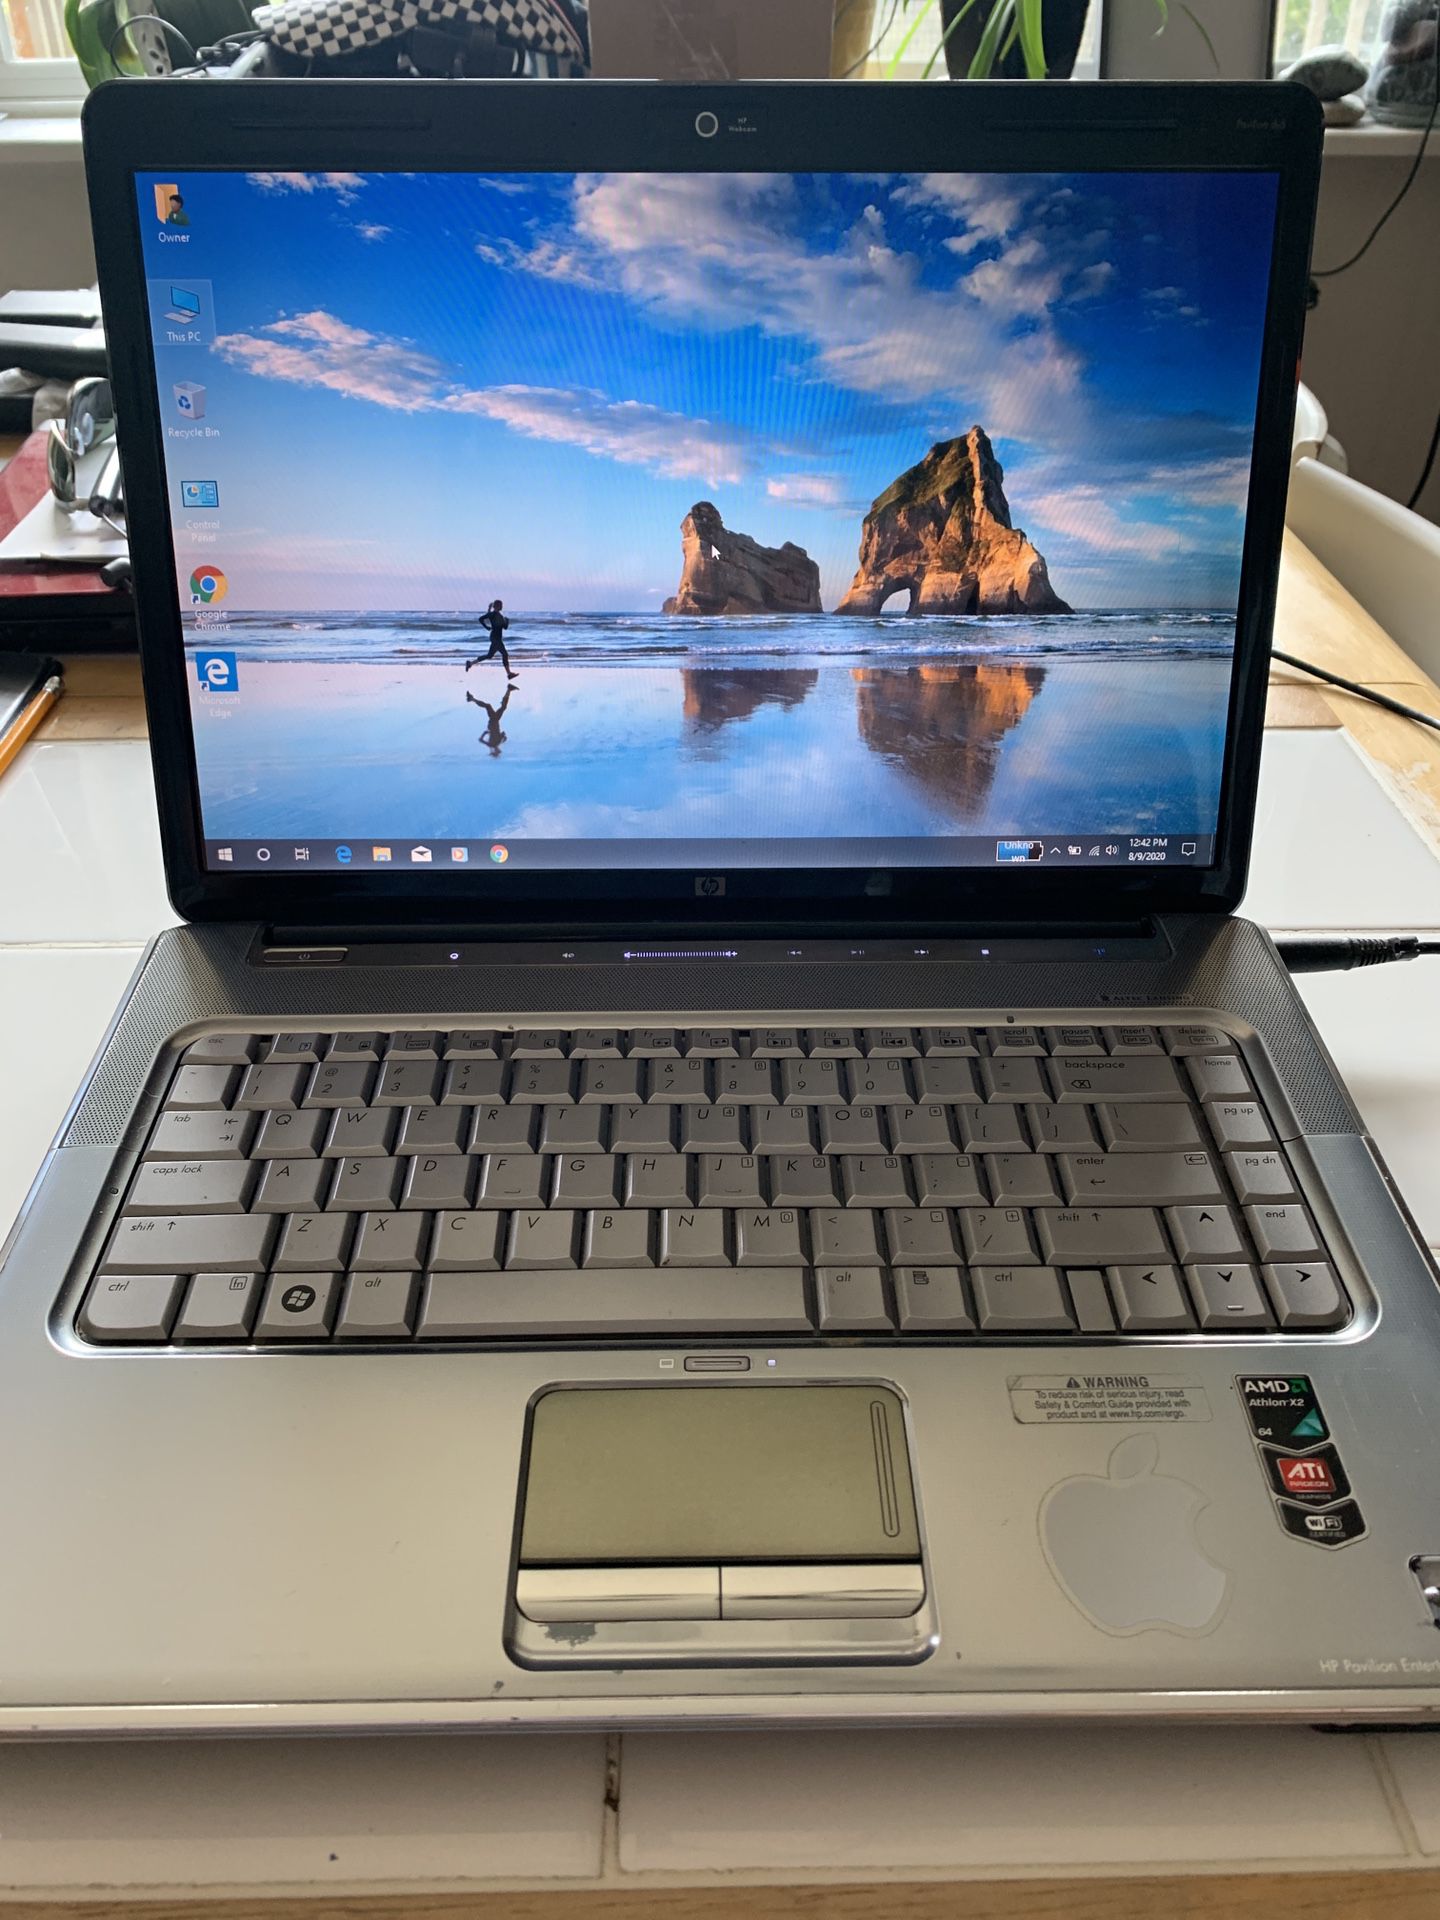 Old, 15 inch HP laptop with windows 10